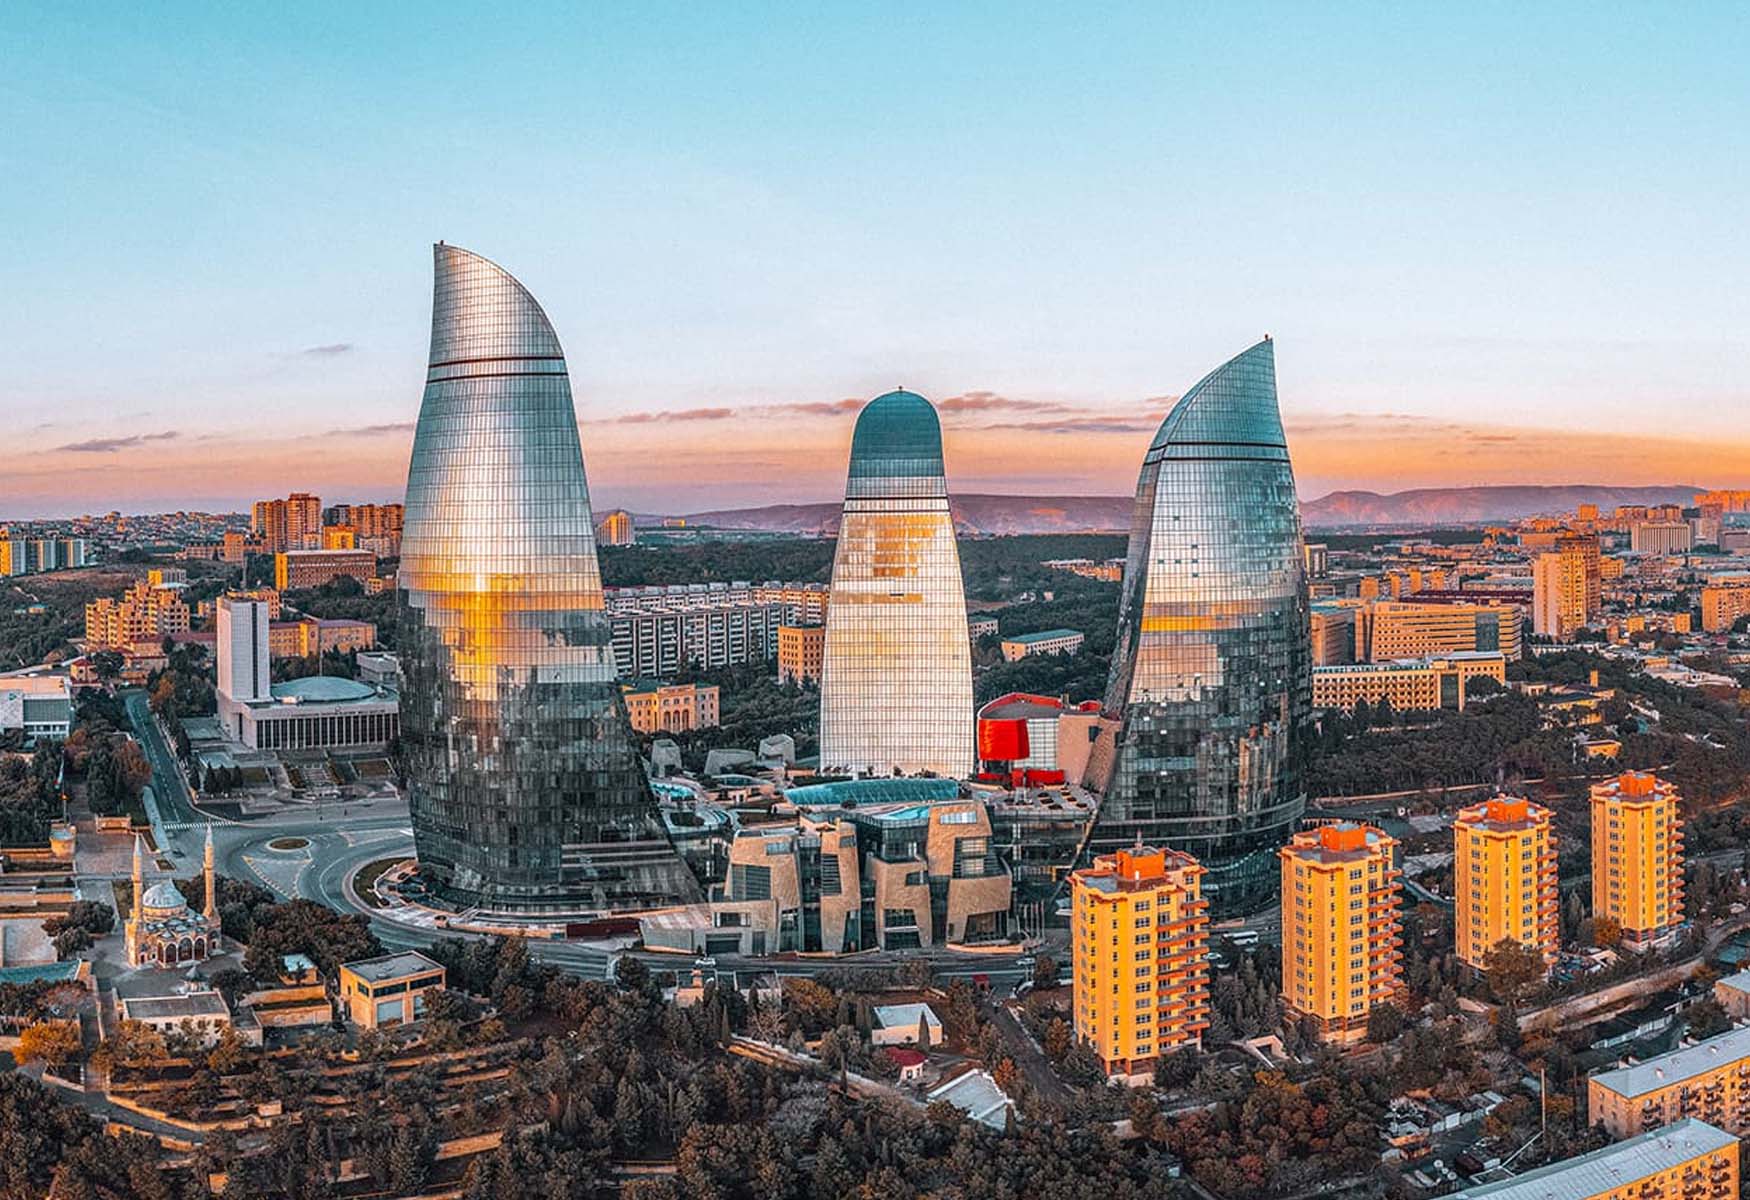 Where To Stay In Baku: The BEST Areas